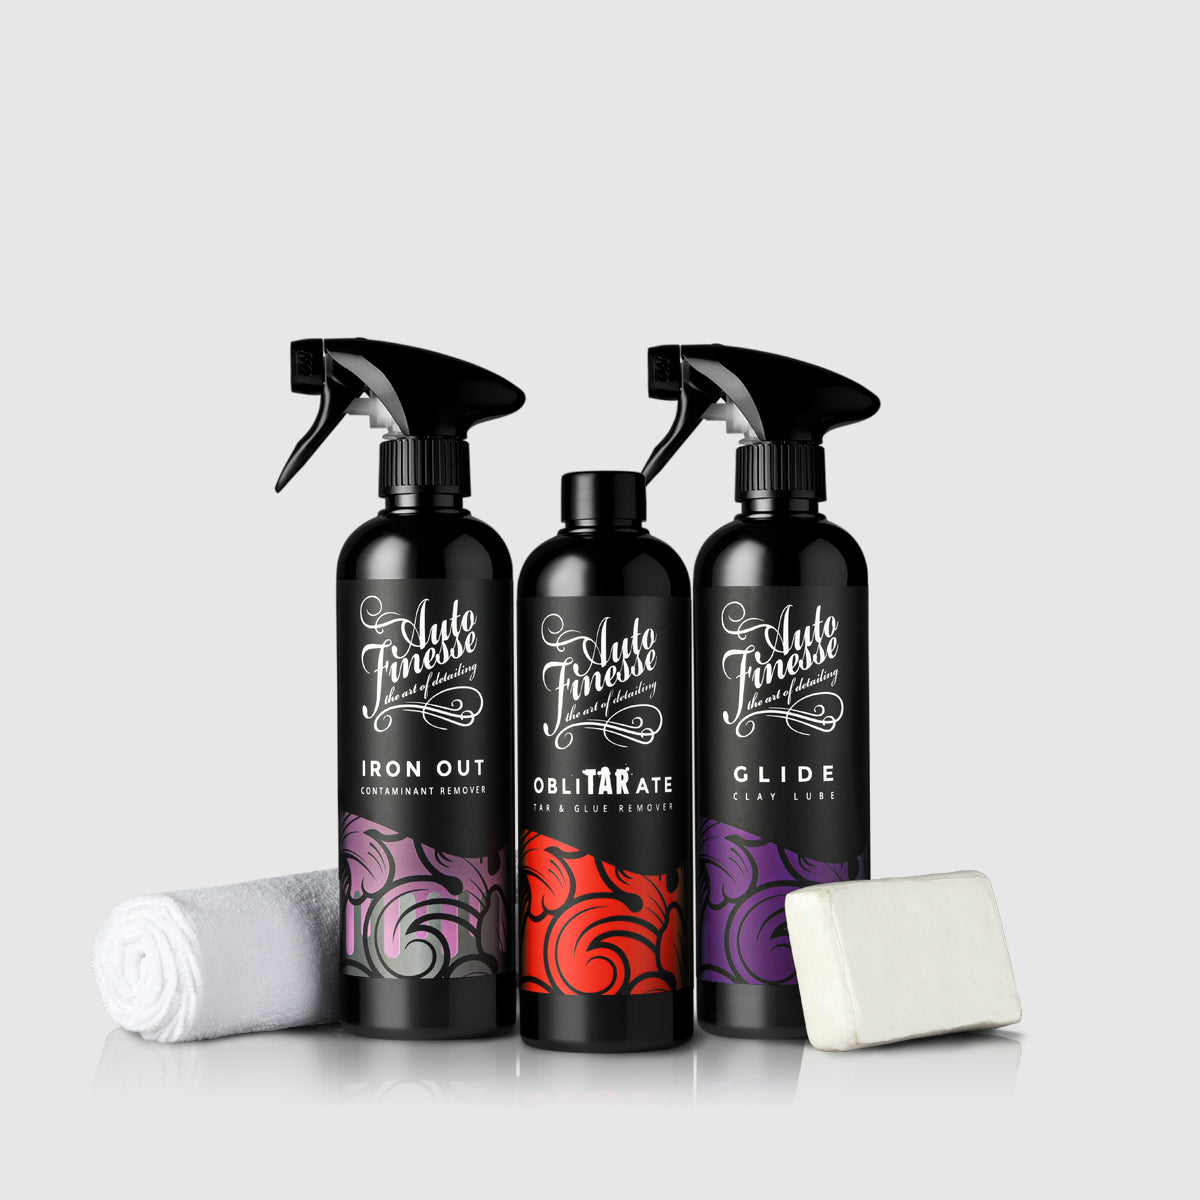 Auto Finesse | Car Detailing Products | Decontamination Kit